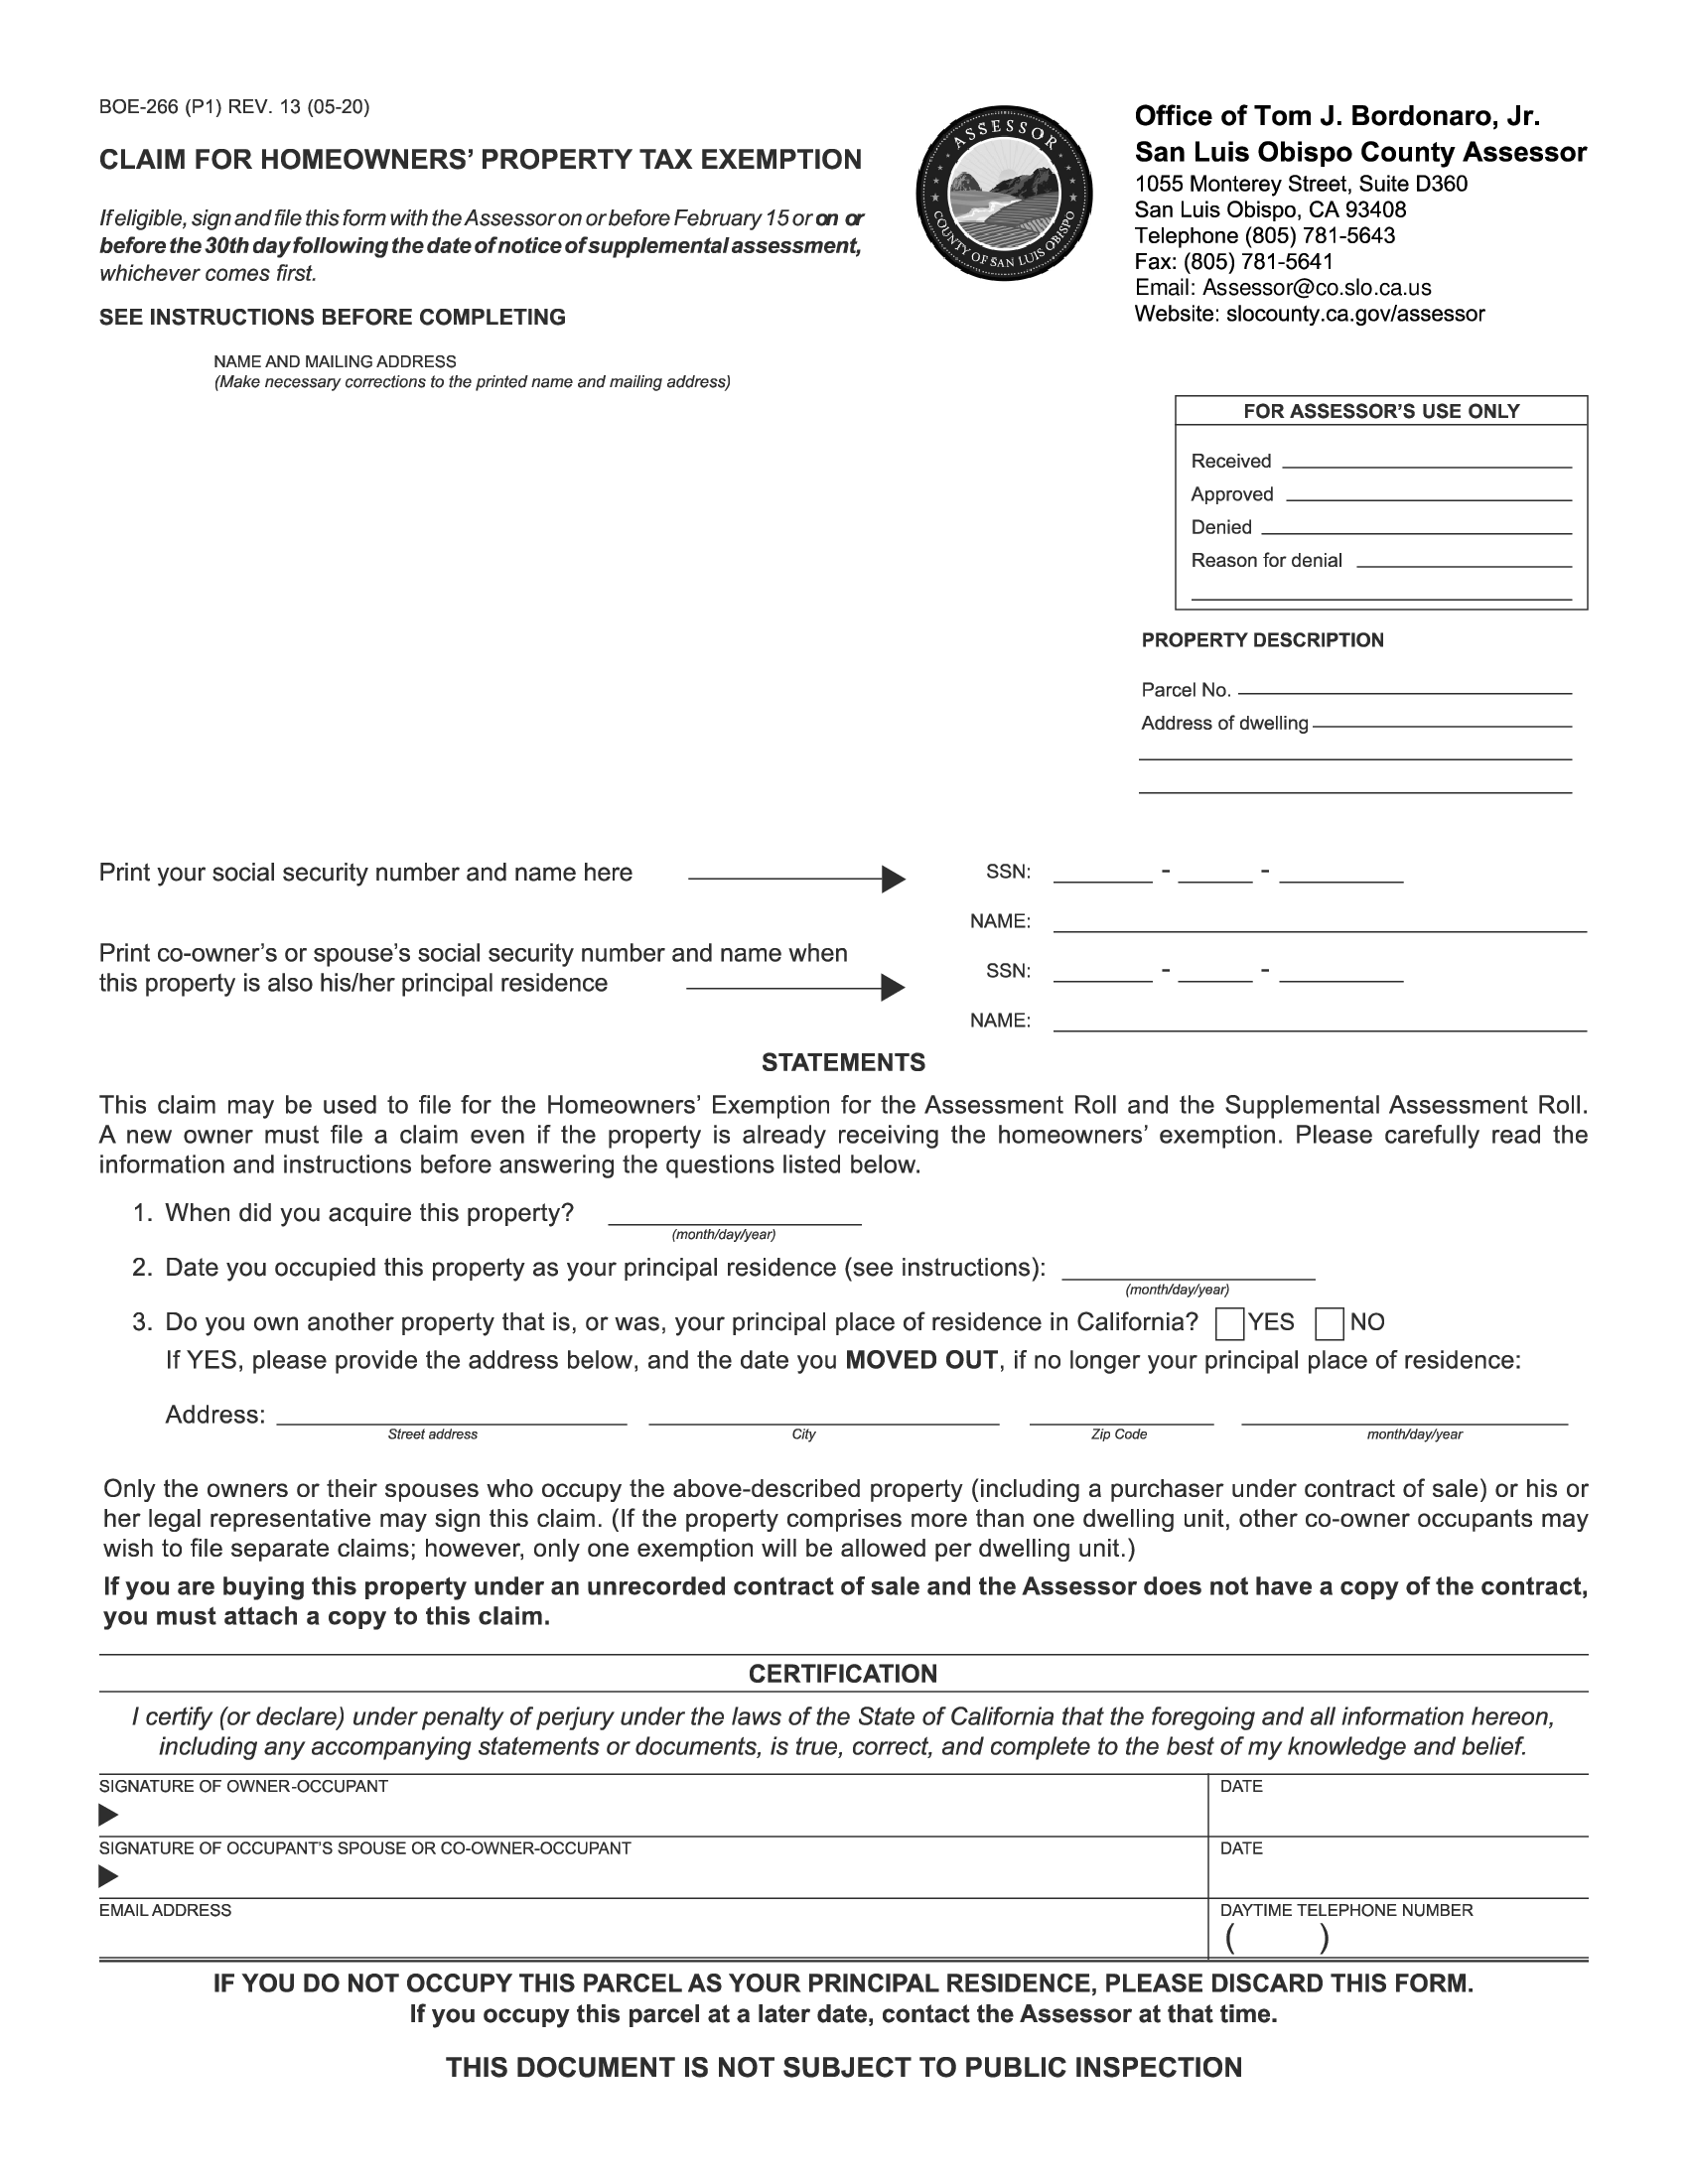 form-boe-266-claim-for-homeowners-property-tax-exemption-forms